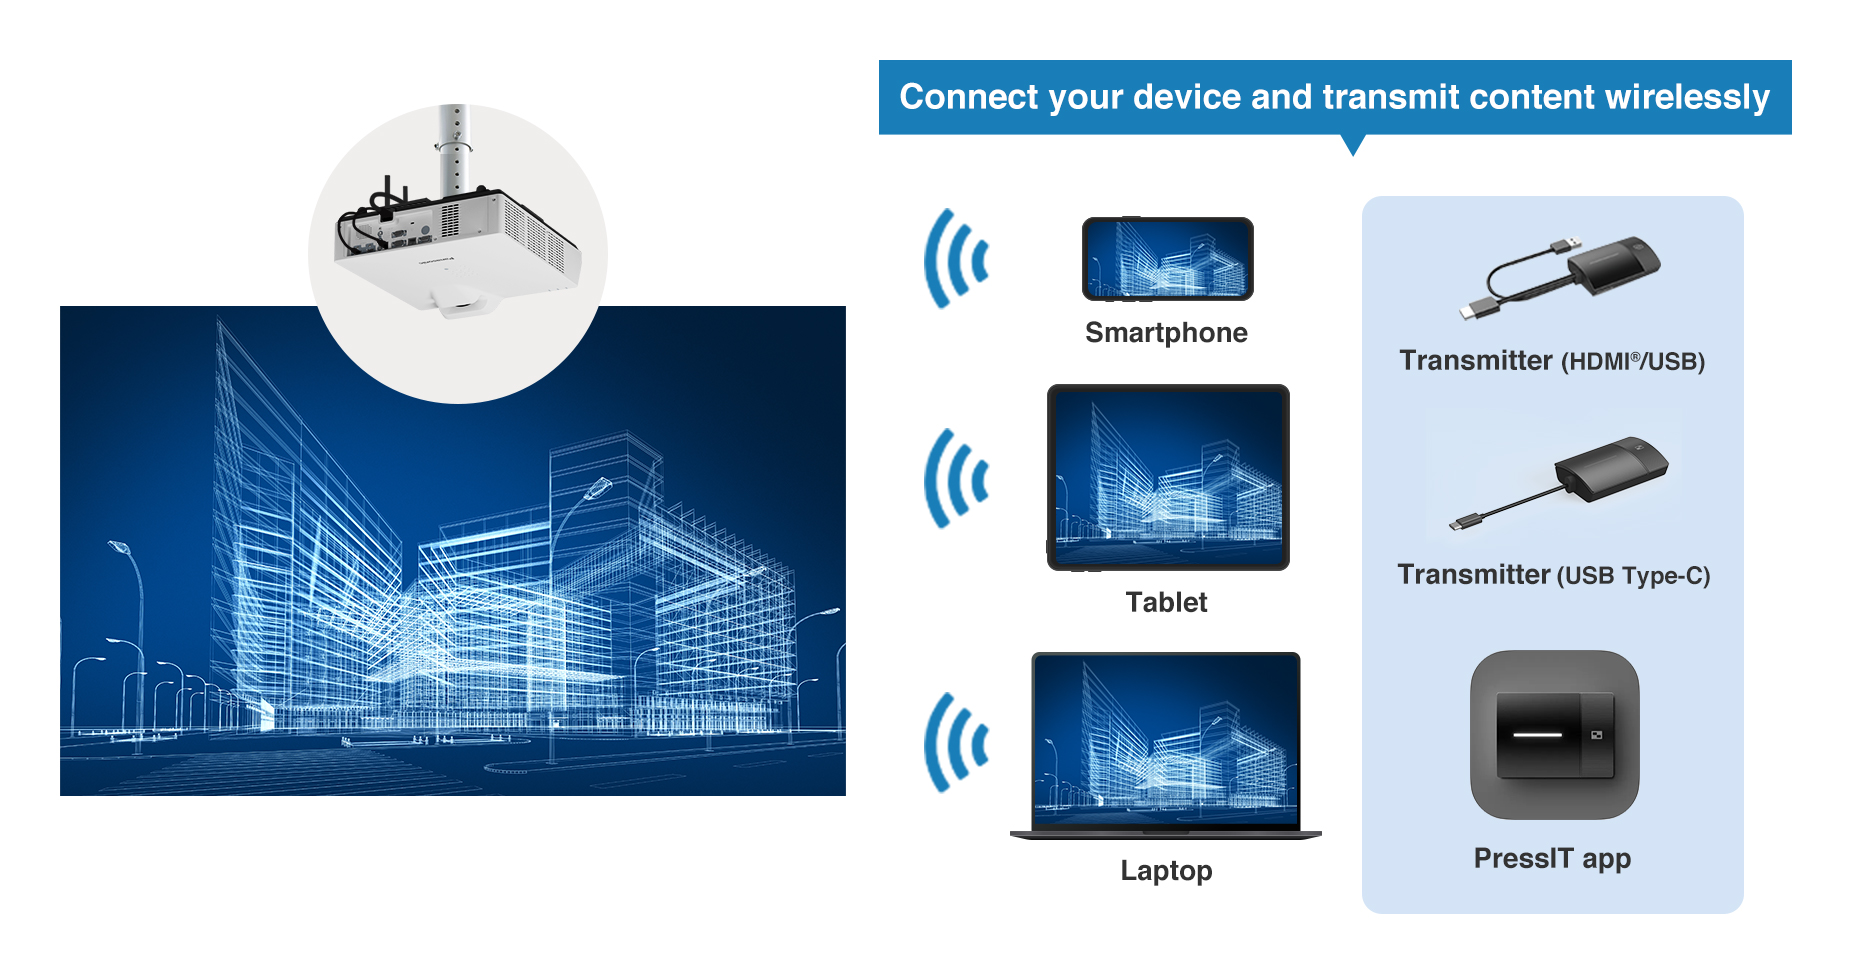 Connect your device and transmit content wirelessly